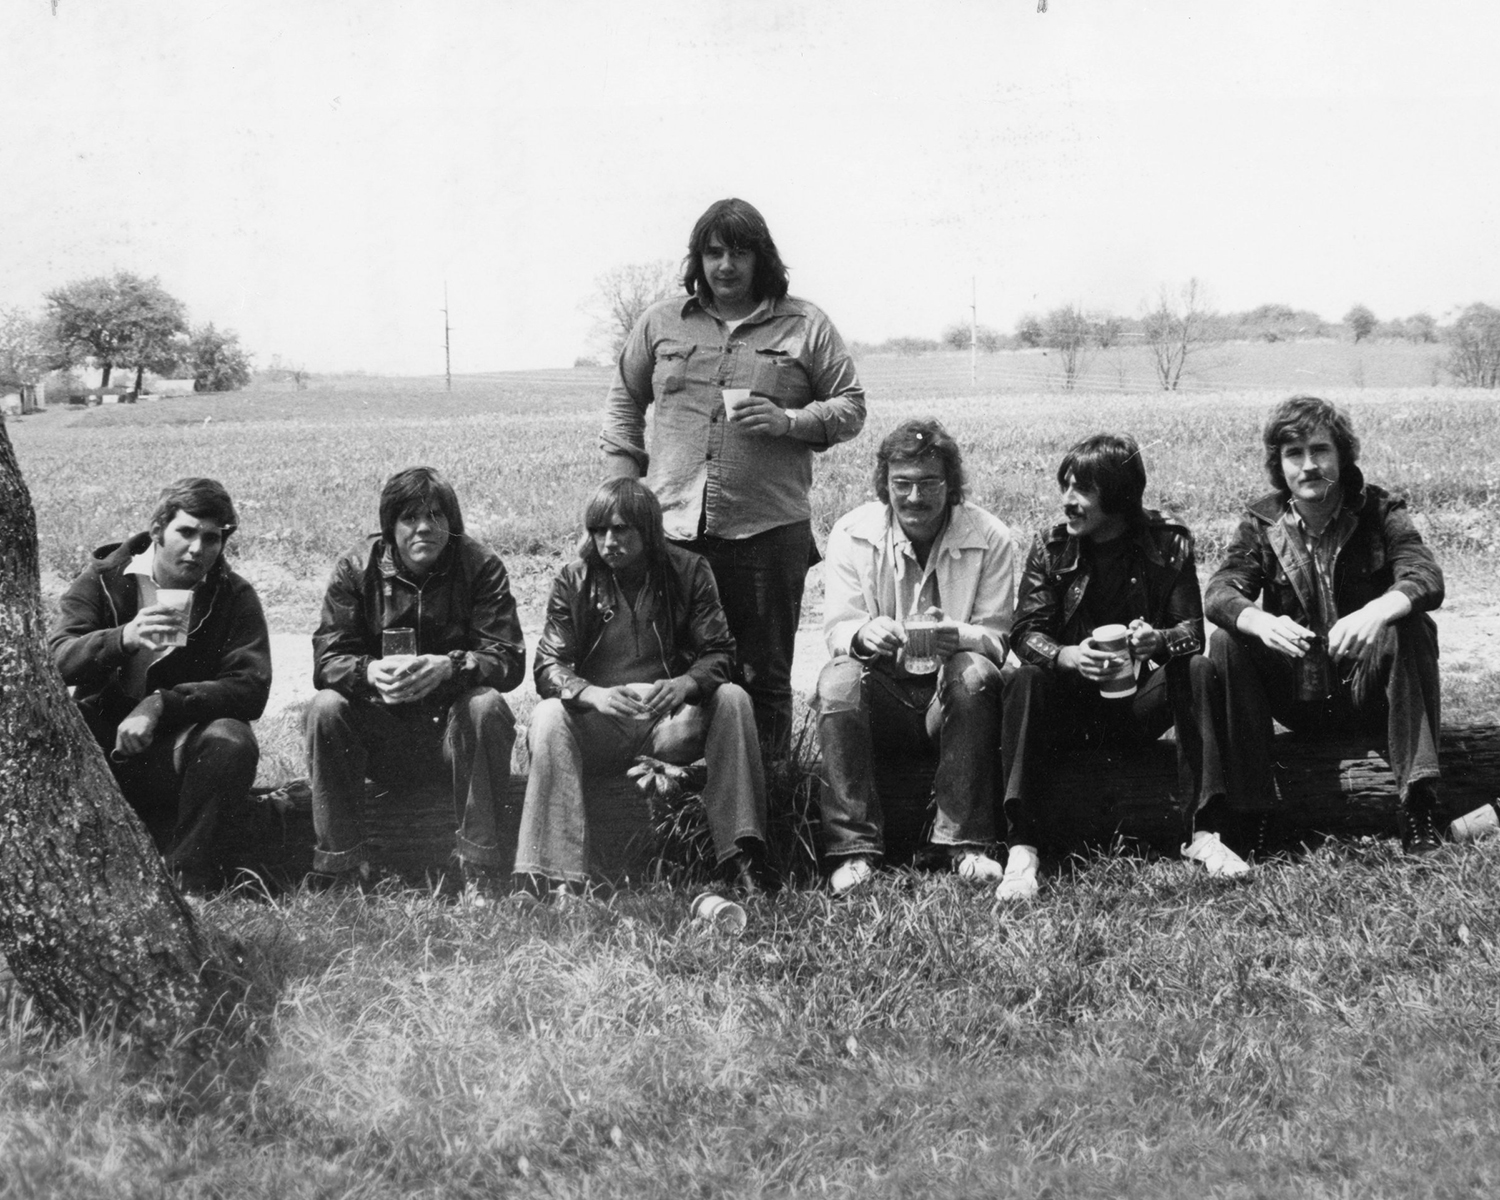 Members of the Saint Vincent community continuing the tradition of brewing and gathering over beer in the 1970s